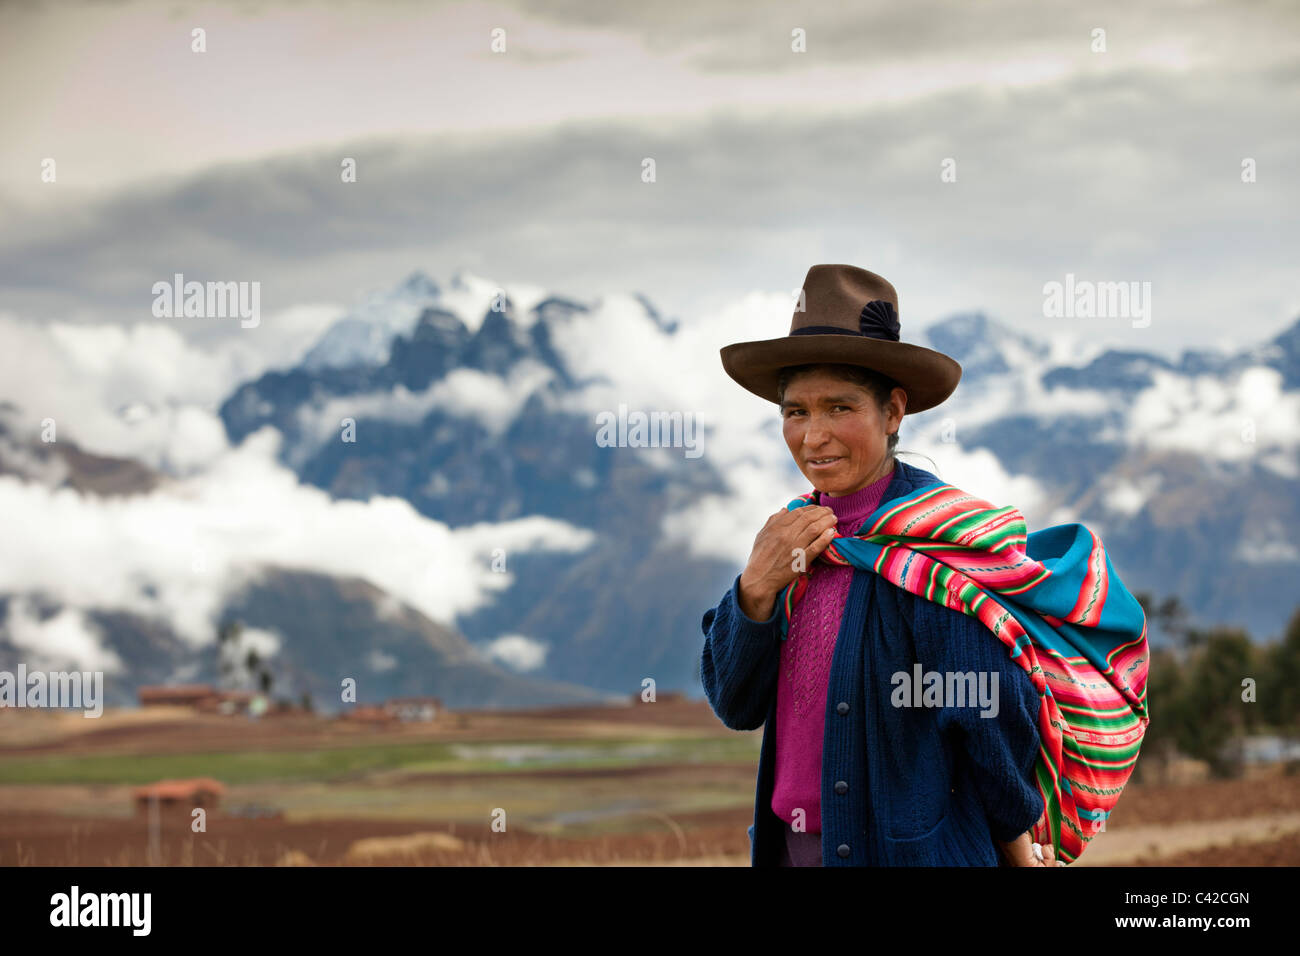 Peru, Chinchero, Farmer's woman, Indian, in front of snowcovered Andes mountains. Stock Photo